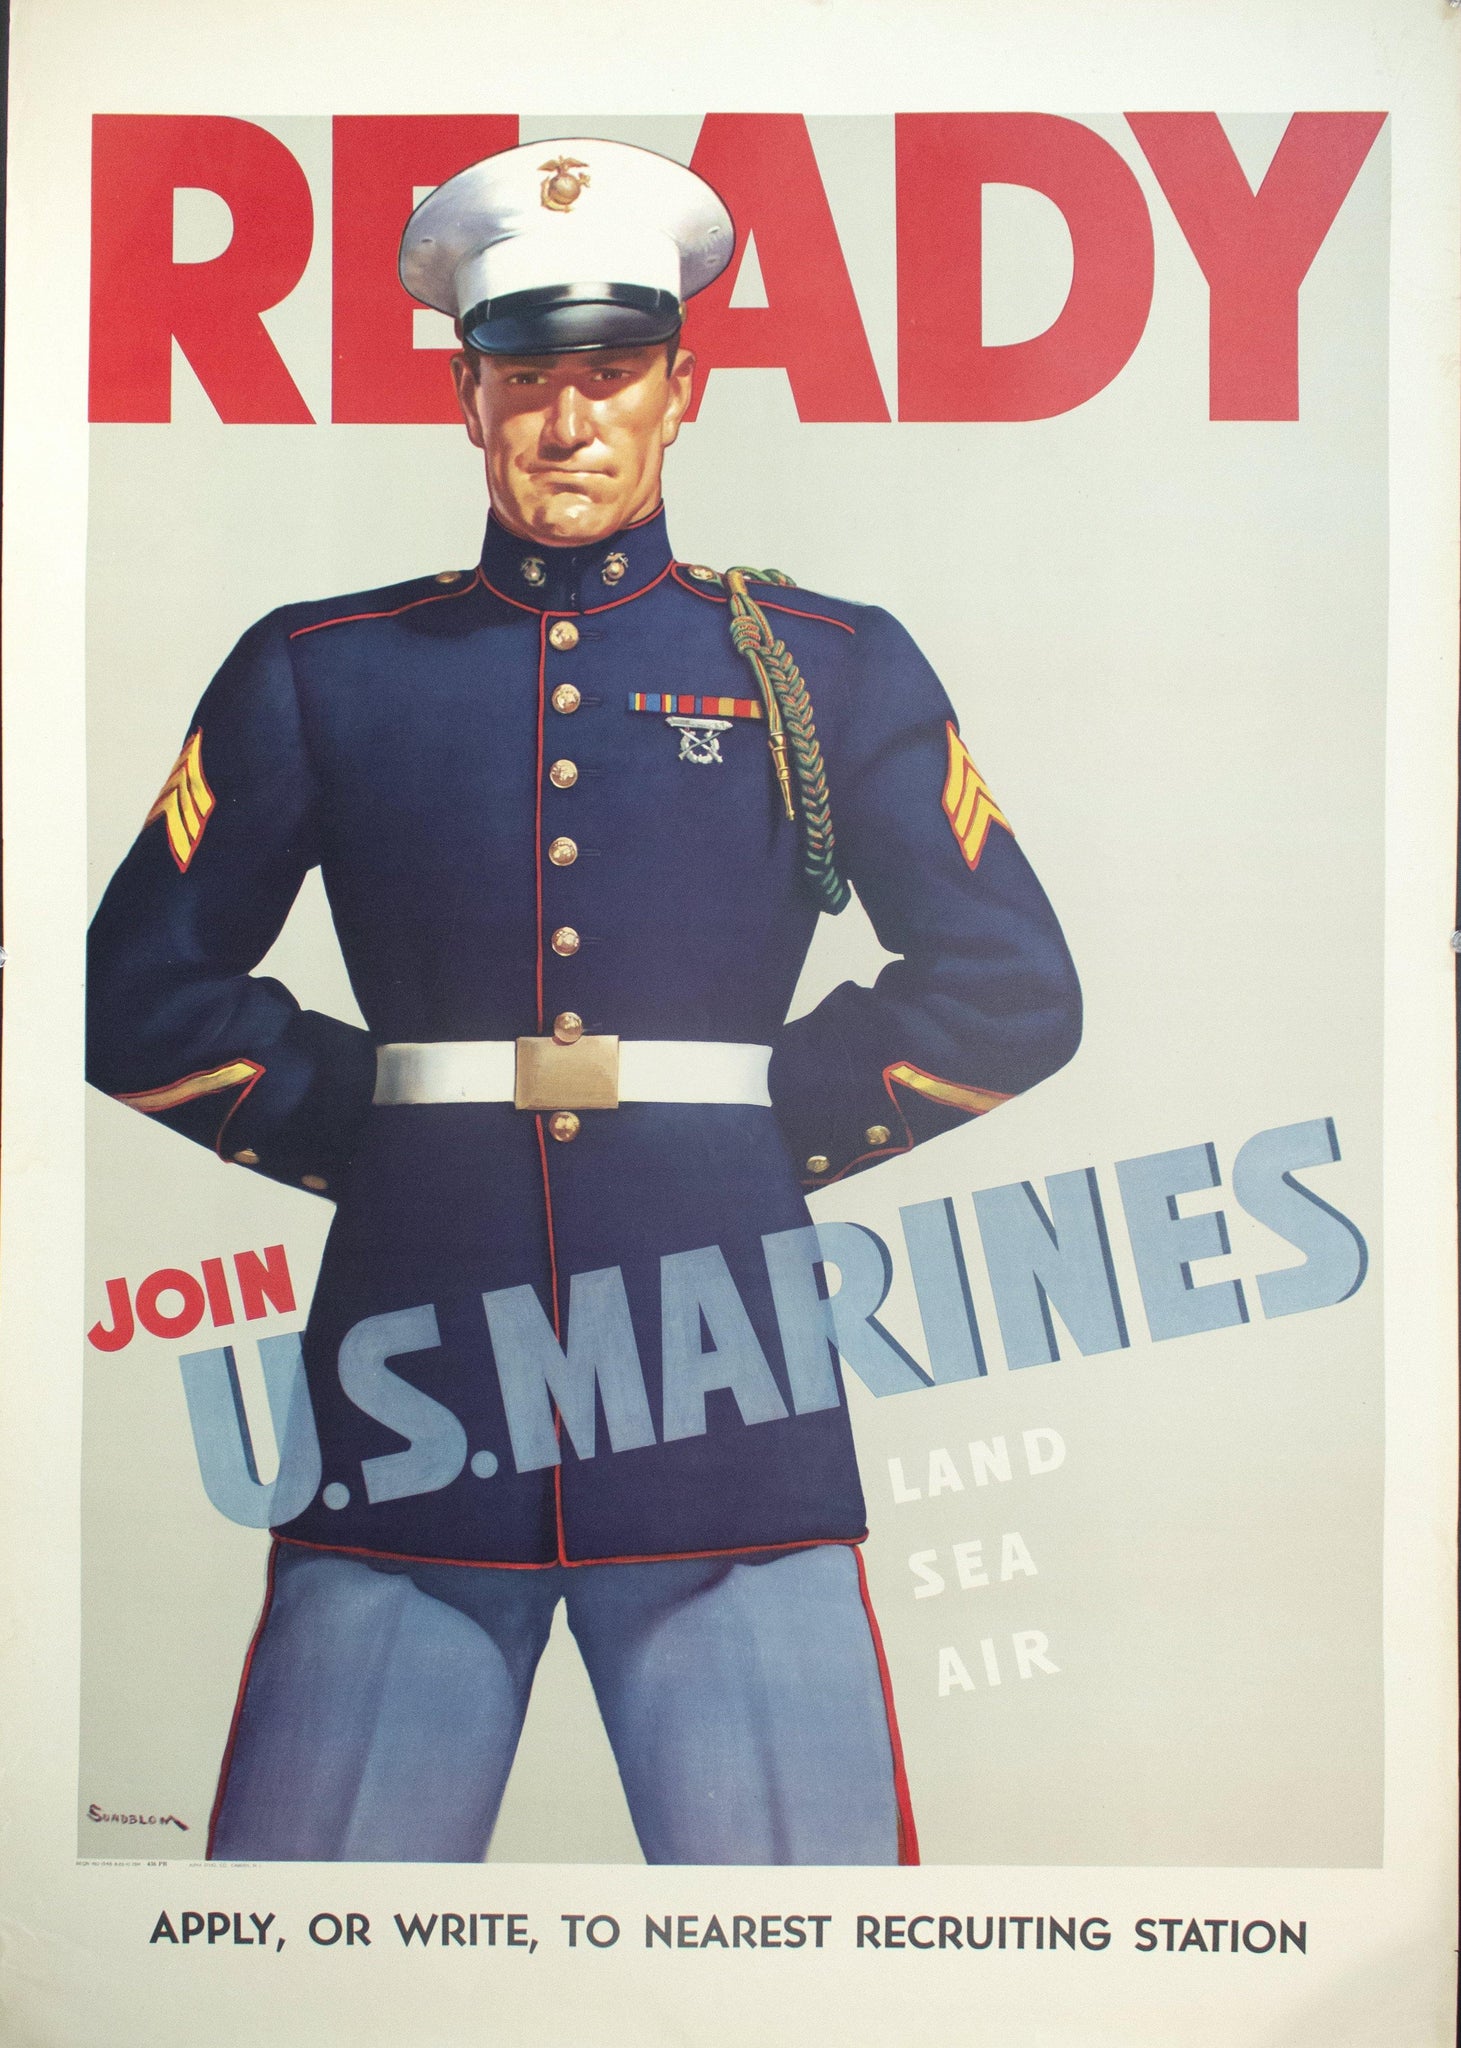 1942 Ready Join US Marines Recruitment by Sundblom - Golden Age Posters